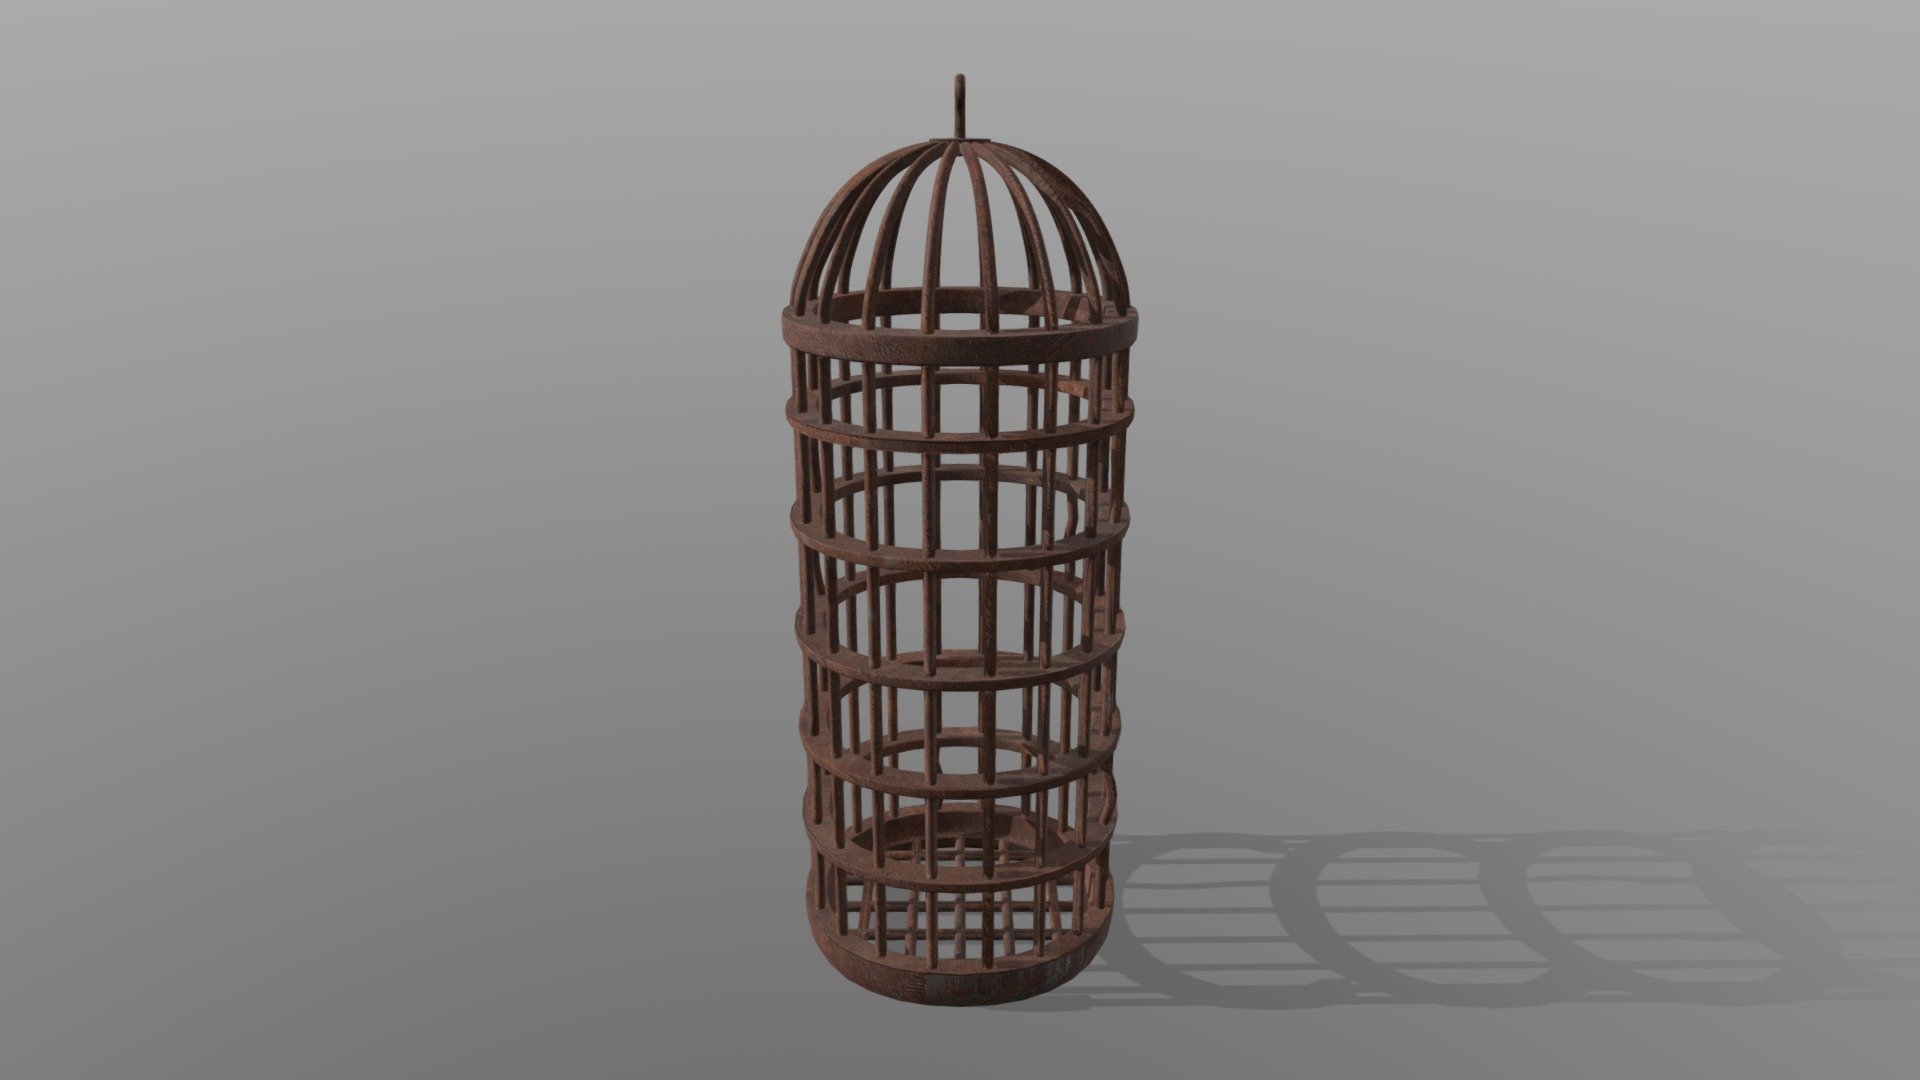 Medieval Prison Cage 3D model done in maya and textured in substance painter - Medieval Prison Cage - 3D model by Matteo Gazzi (@Yebisss) 3d model